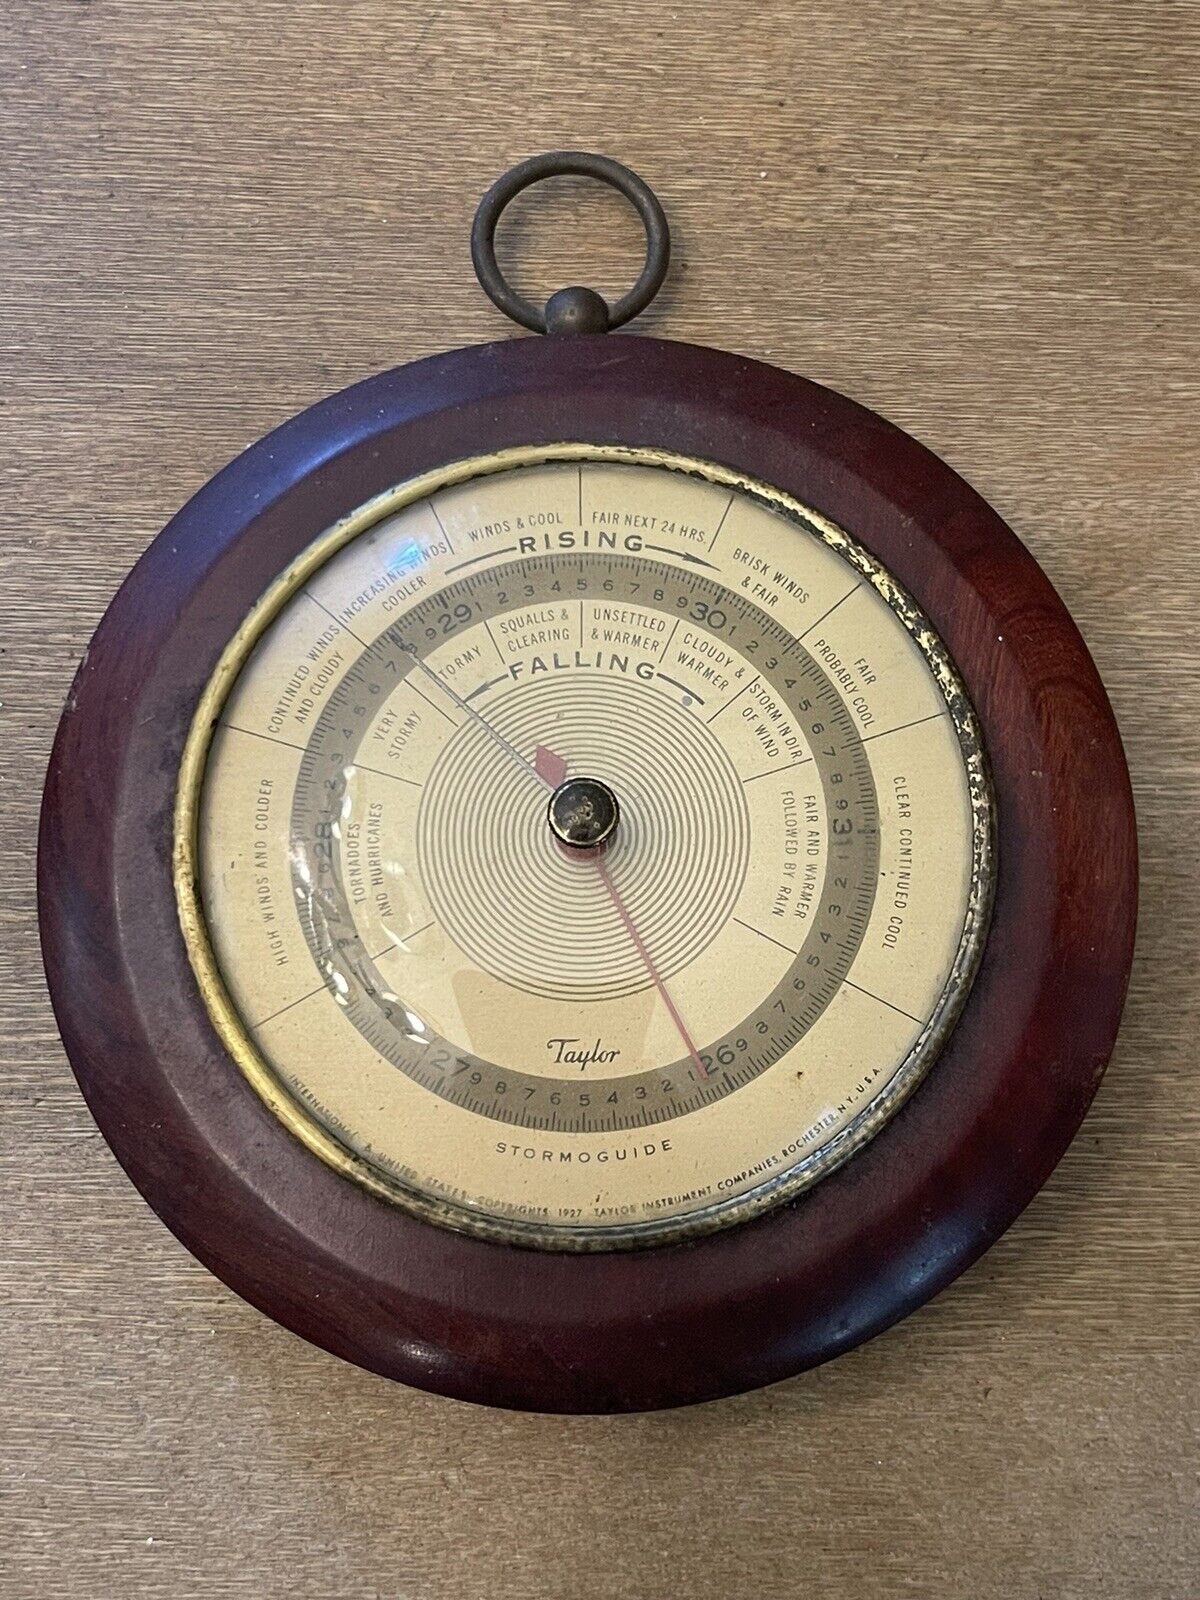 Vintage Taylor Wall Mount, Baroguide, Barometer - an Early Home Weather Station